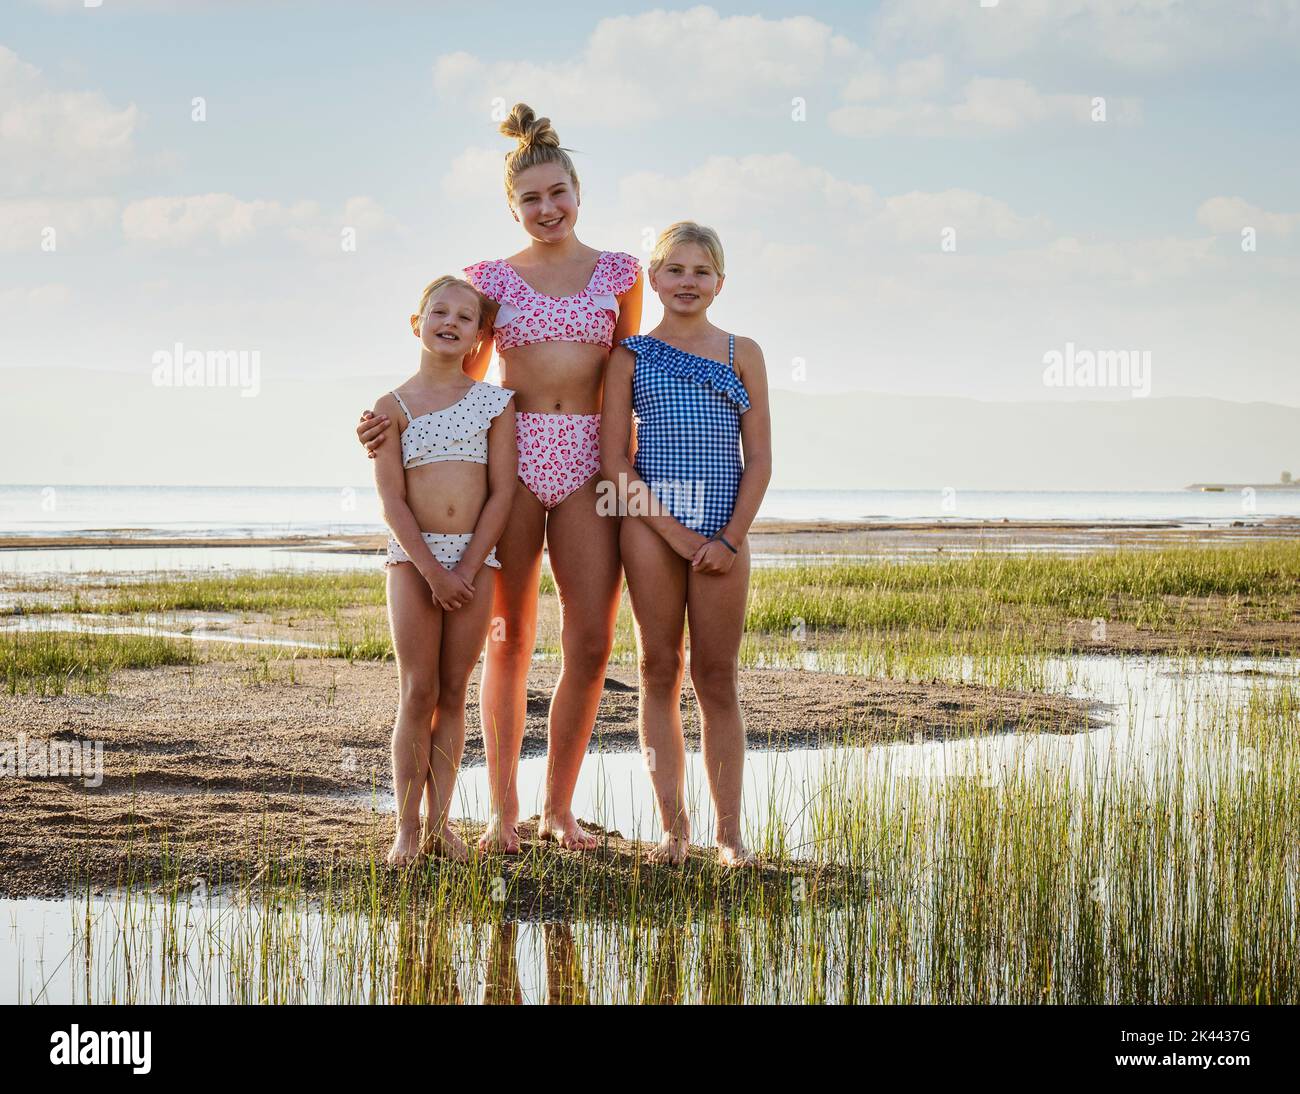 Portrait of smiling girls (10-11, 12-13, 14-15) in swimsuits standing on lakeshore Stock Photo